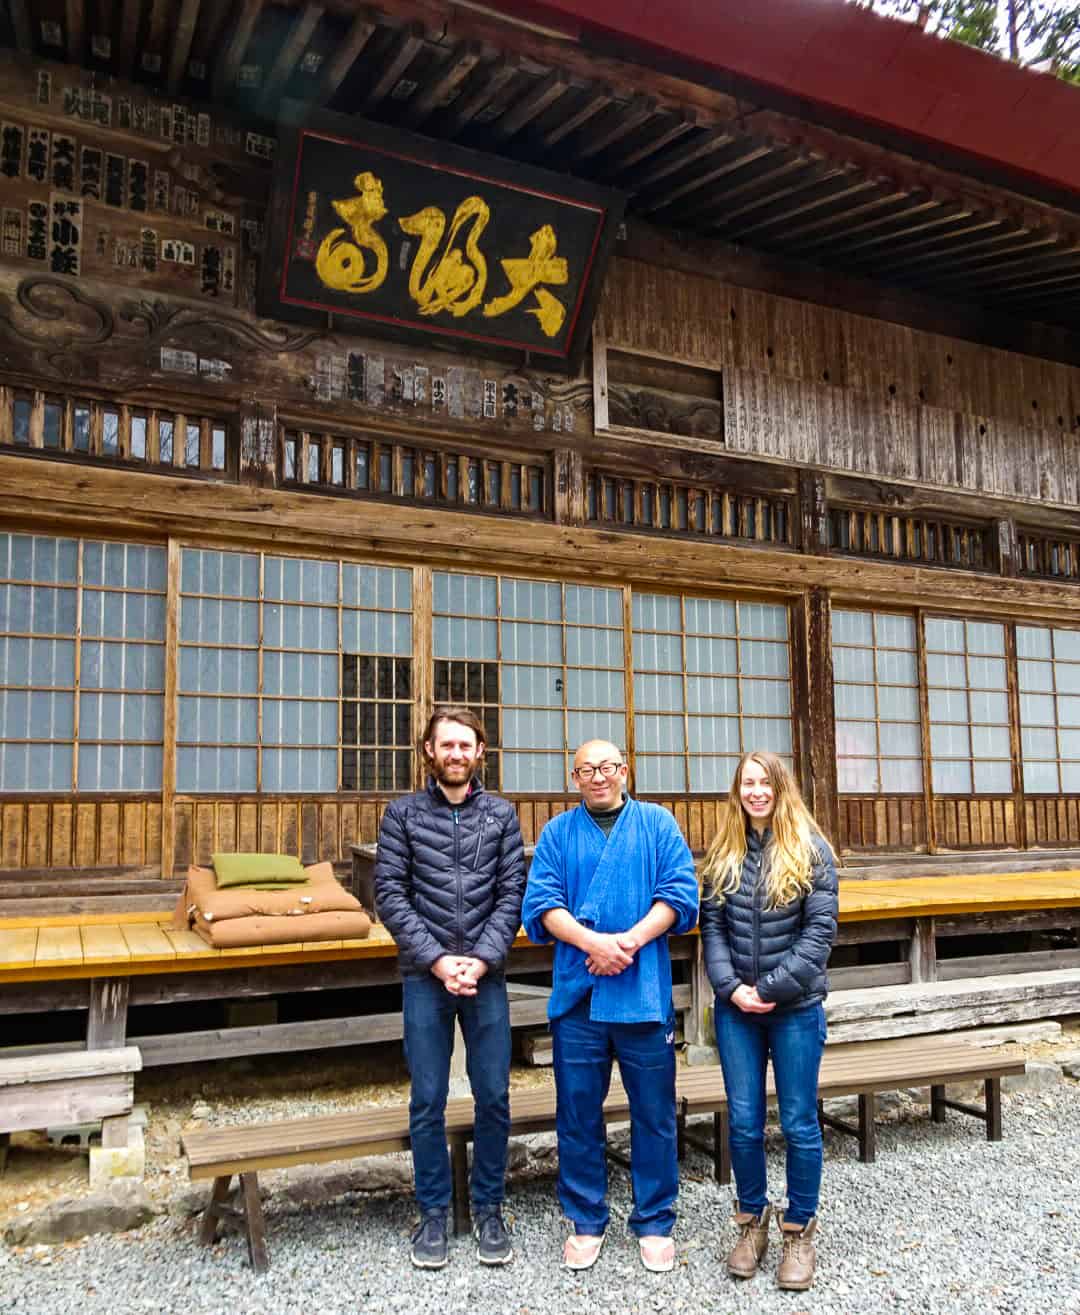 My partner and I, one last picture with Asami before leaving Taiyoji Temple